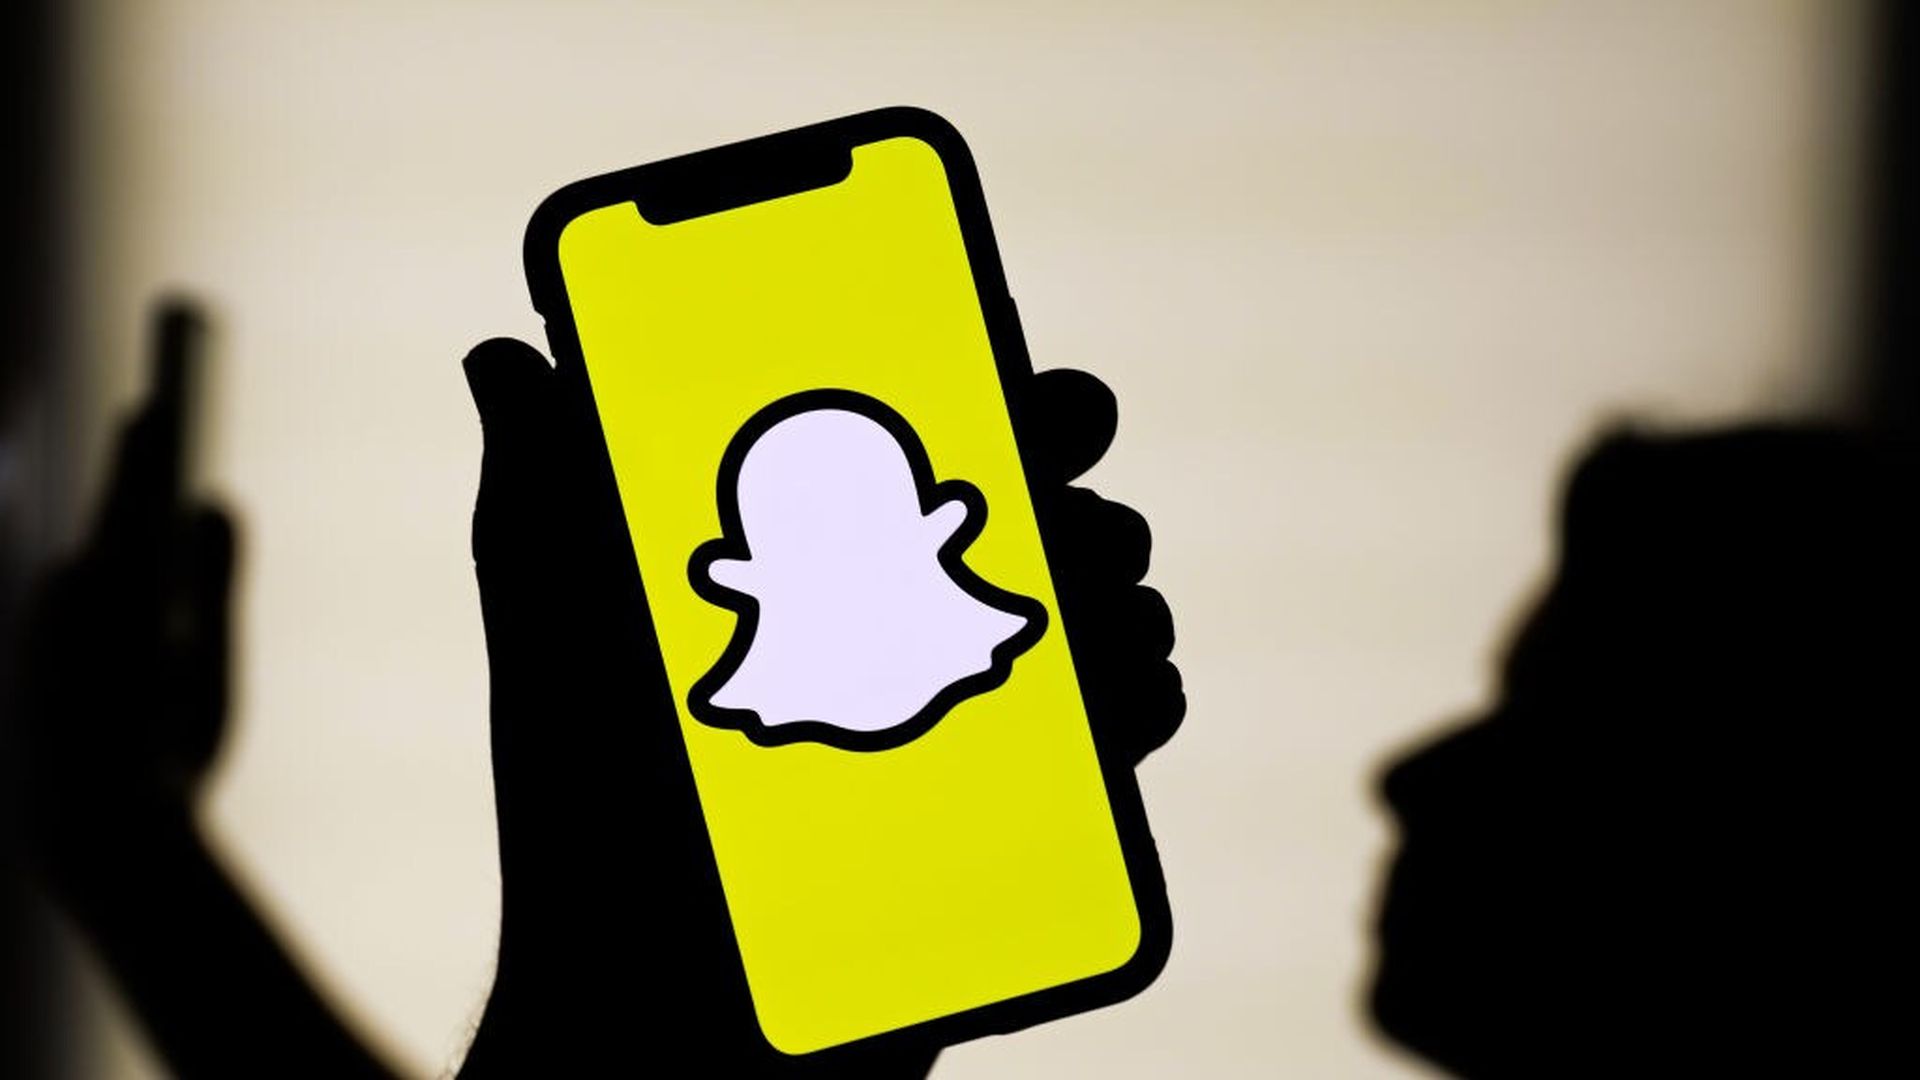 In this article, we are going to be covering Snapchat not working: How to fix Snapchat snaps not sending, so you can snap as much you like without any issues.